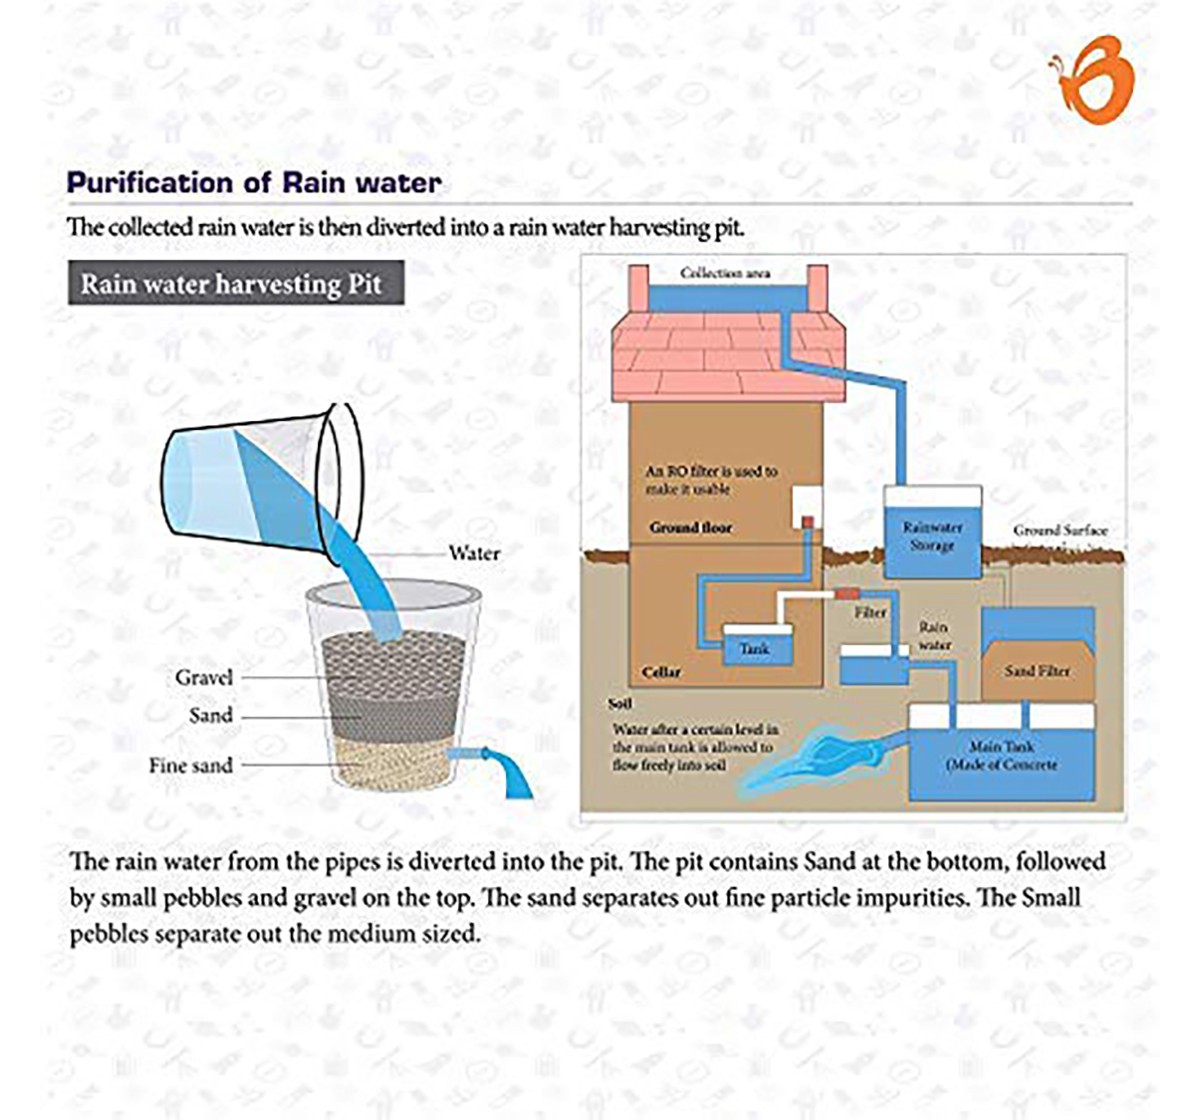 Butterfly Edufields RainWater Harvesting Scaled Models - Science Experiment Kit,Roof Drain & Mini Water Pump Science Project Kit, 8Y+